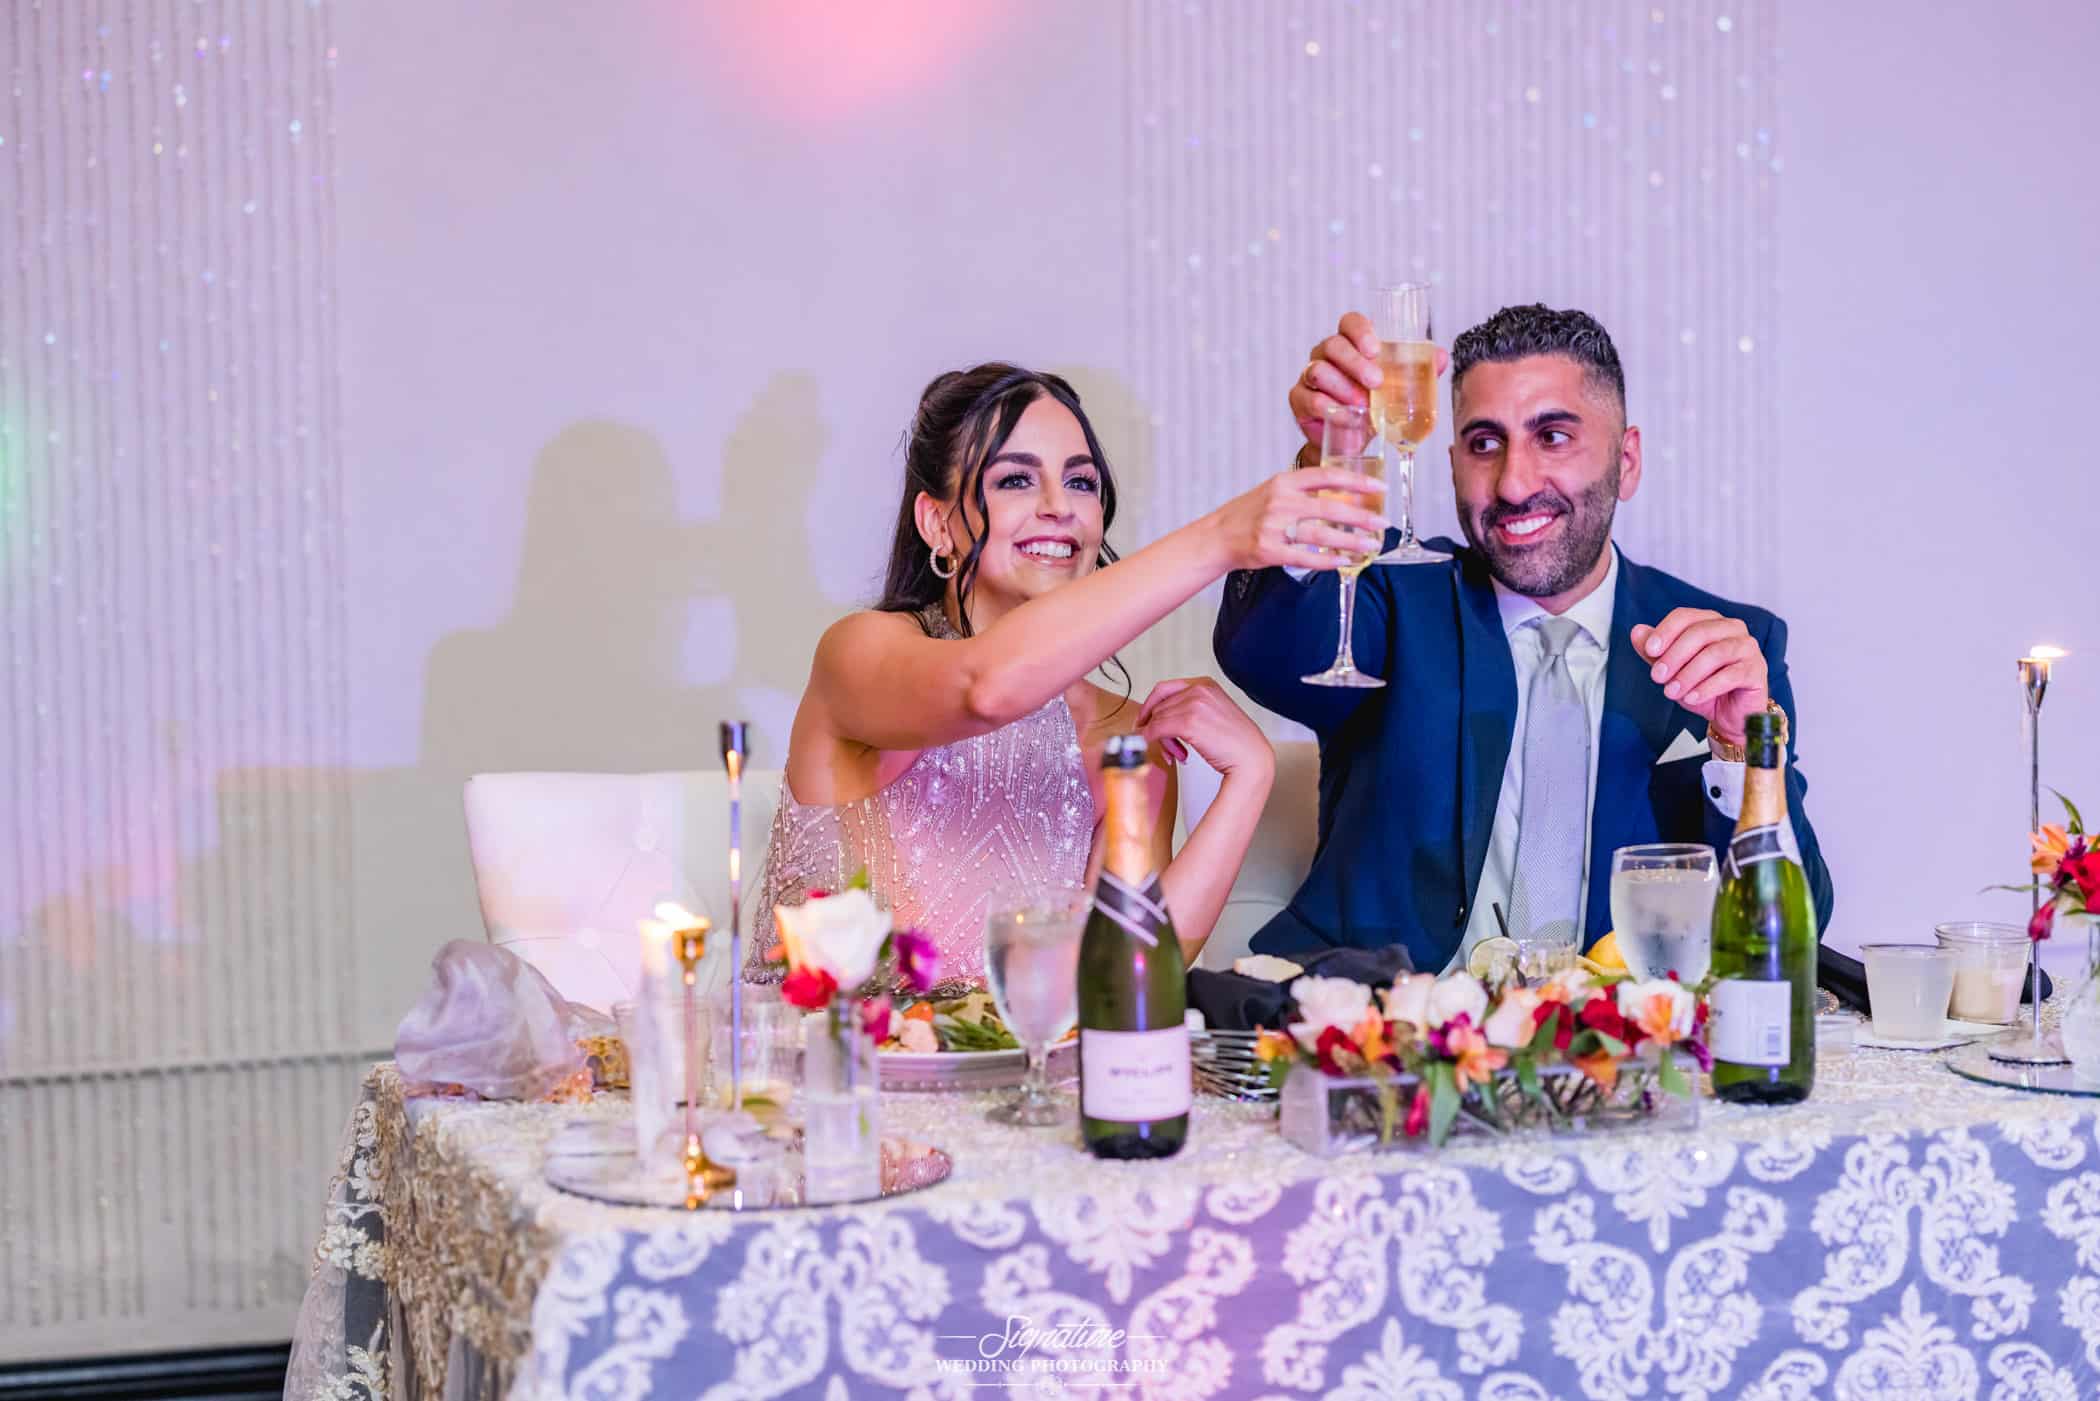 bride and groom making a toast at their wedding reception